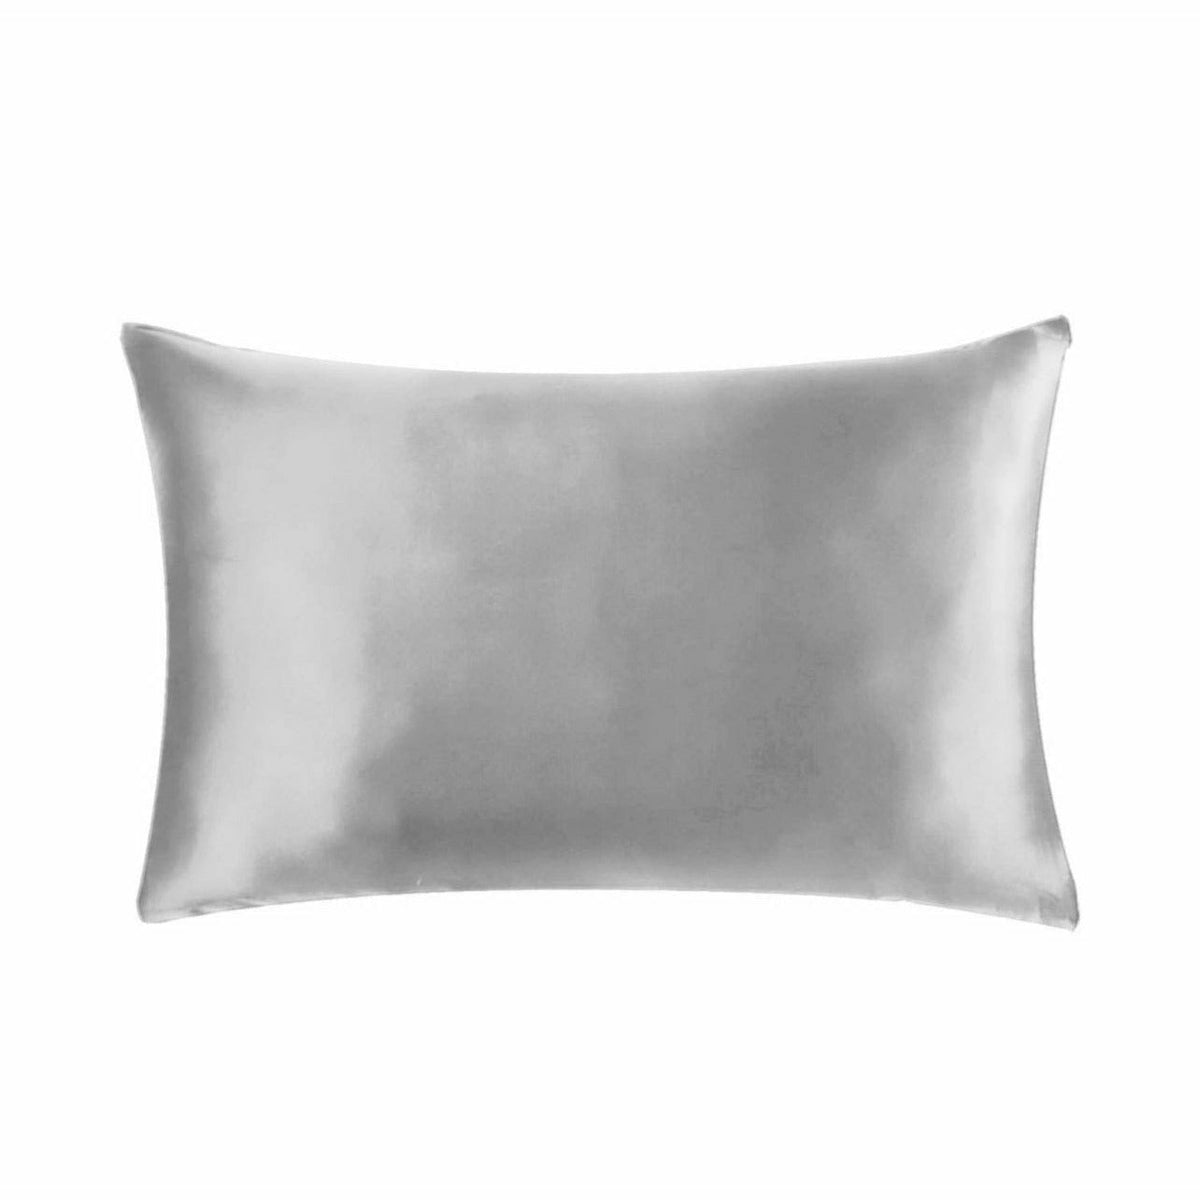 Silk Pillowcase - The Hive by Chris Jesselle